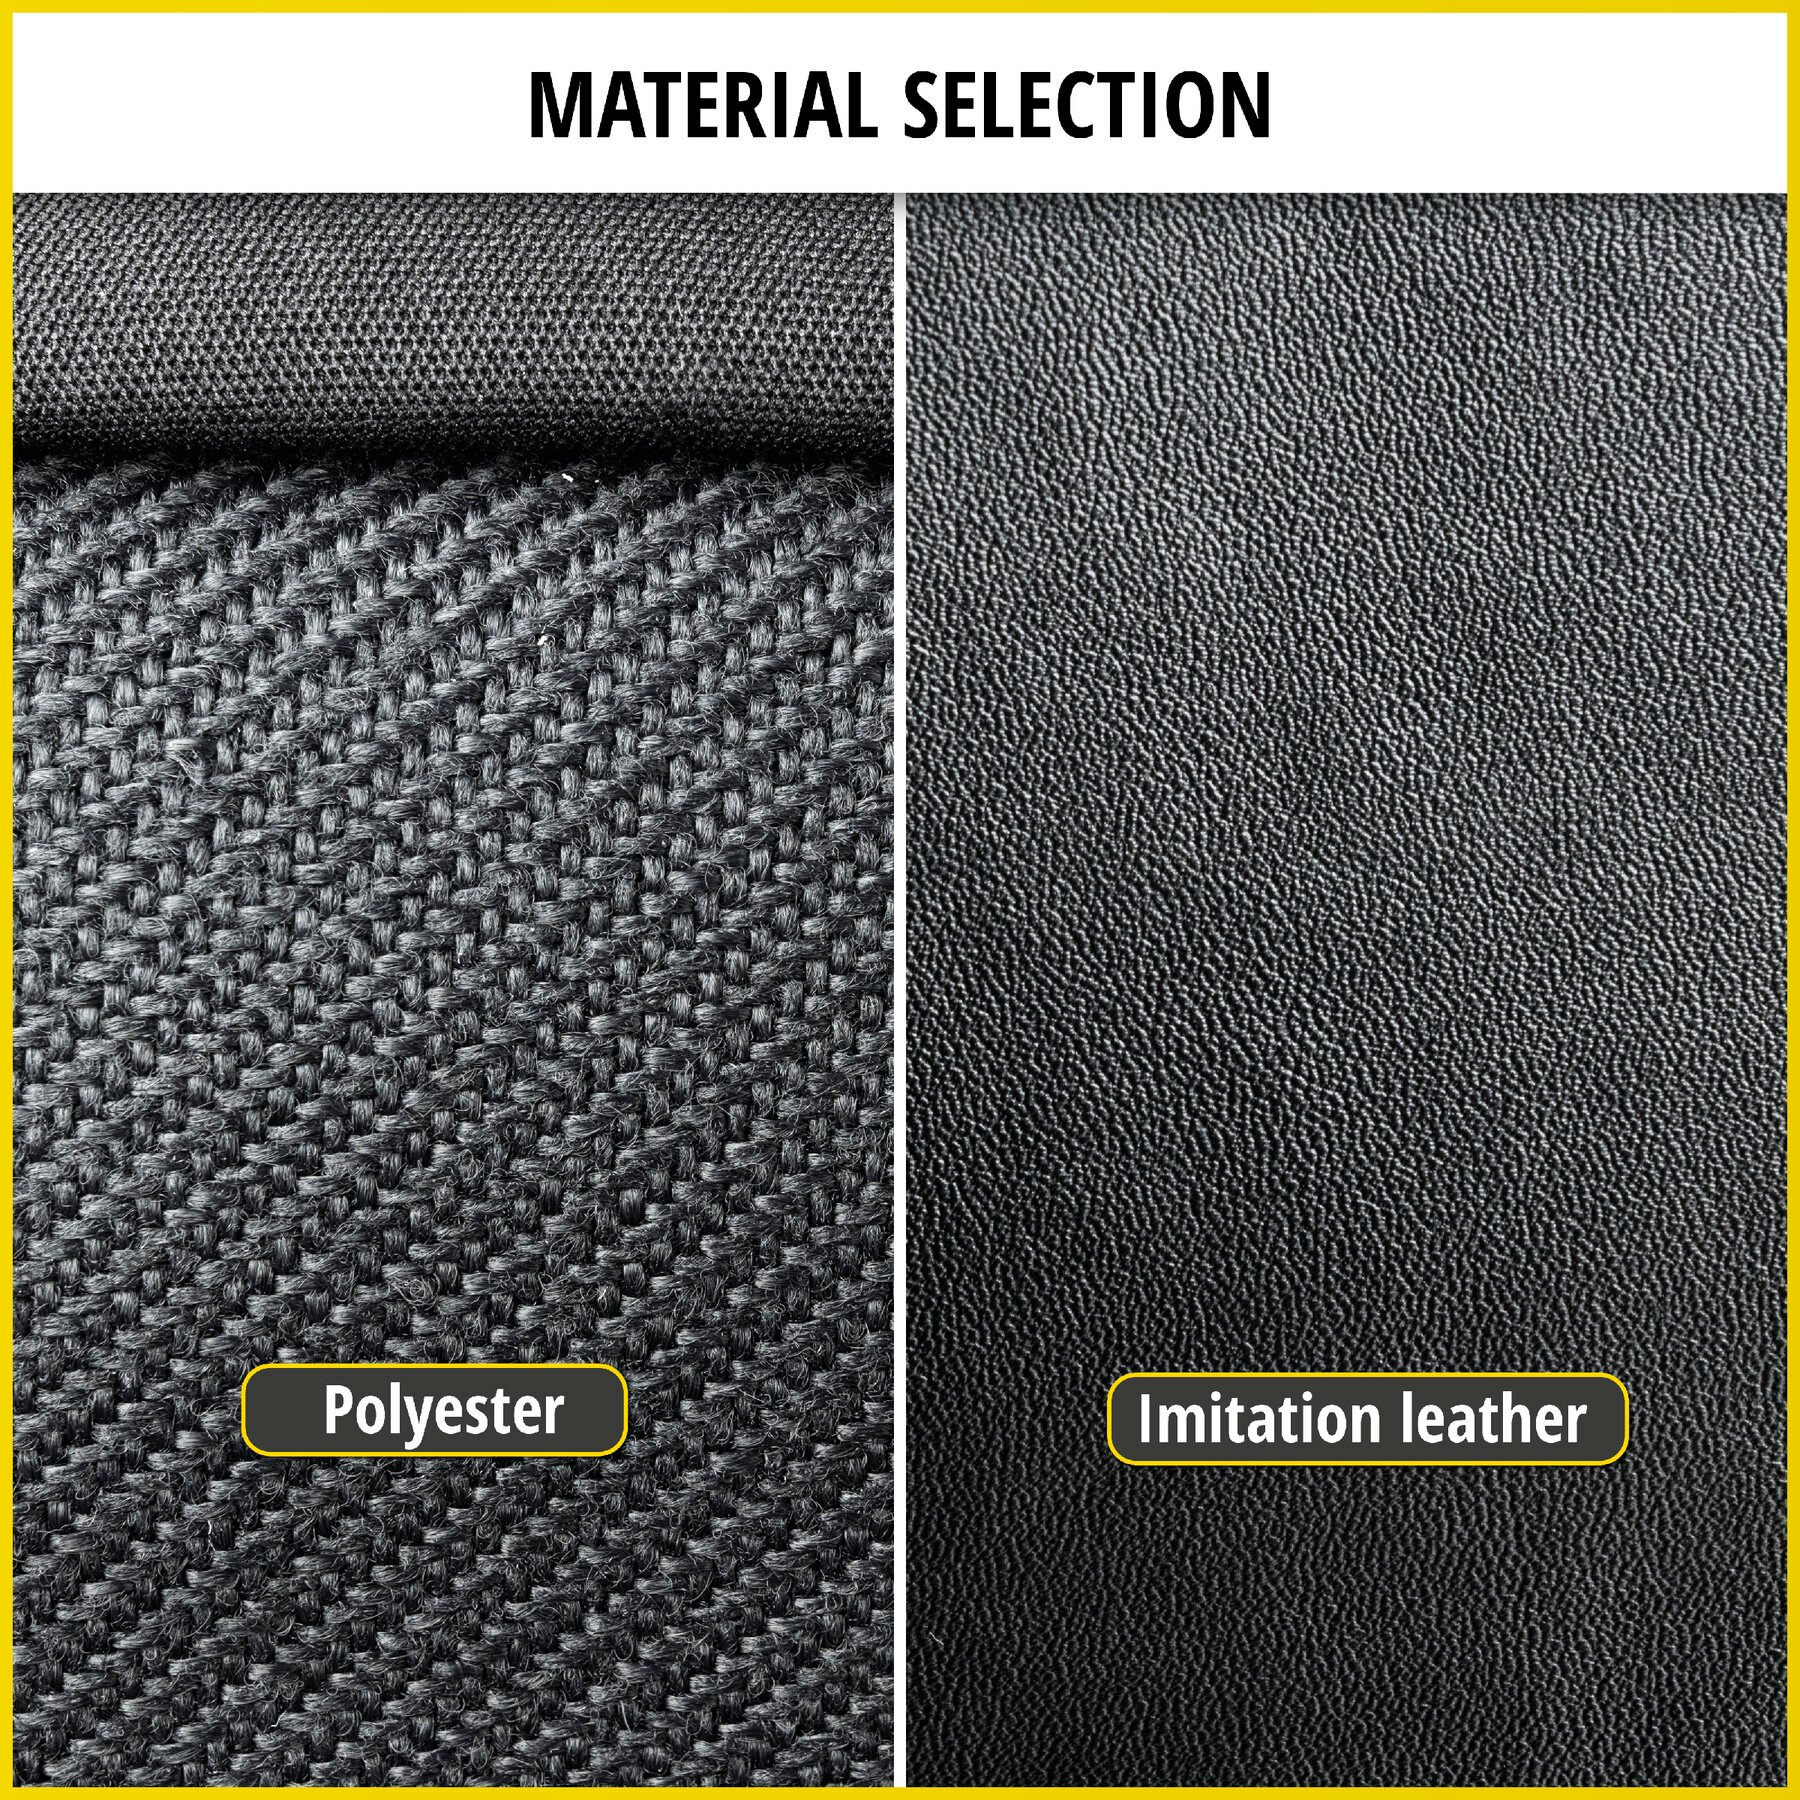 Seat cover made of imitation leather for Mercedes-Benz Viano/Vito, 2 single seat covers armrest inside